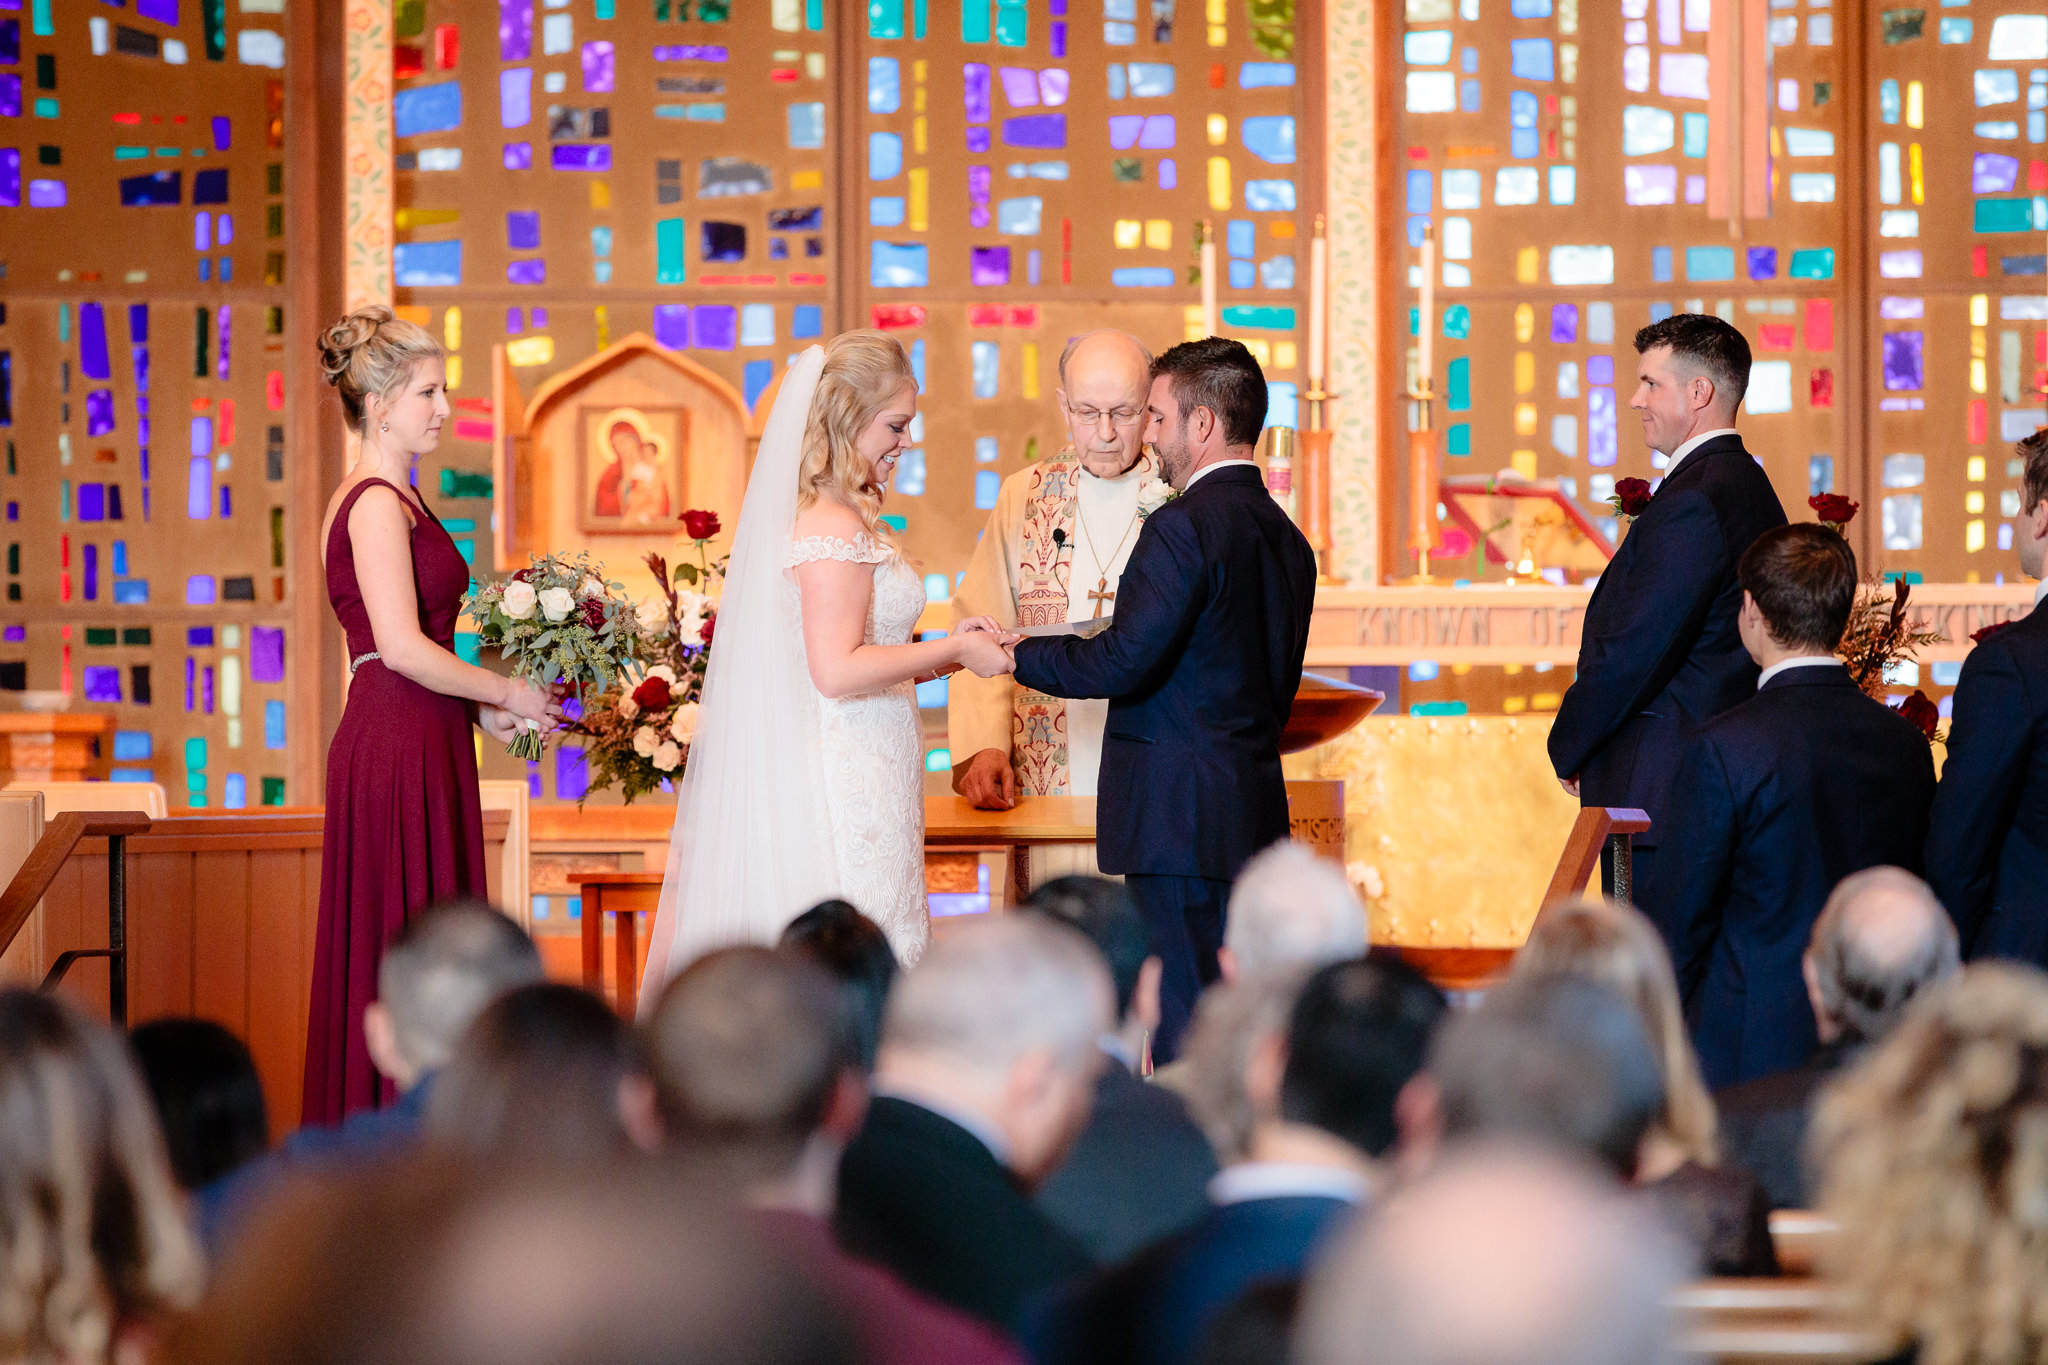 Bride places ring on groom's finger during ceremony at Zion Lutheran Church